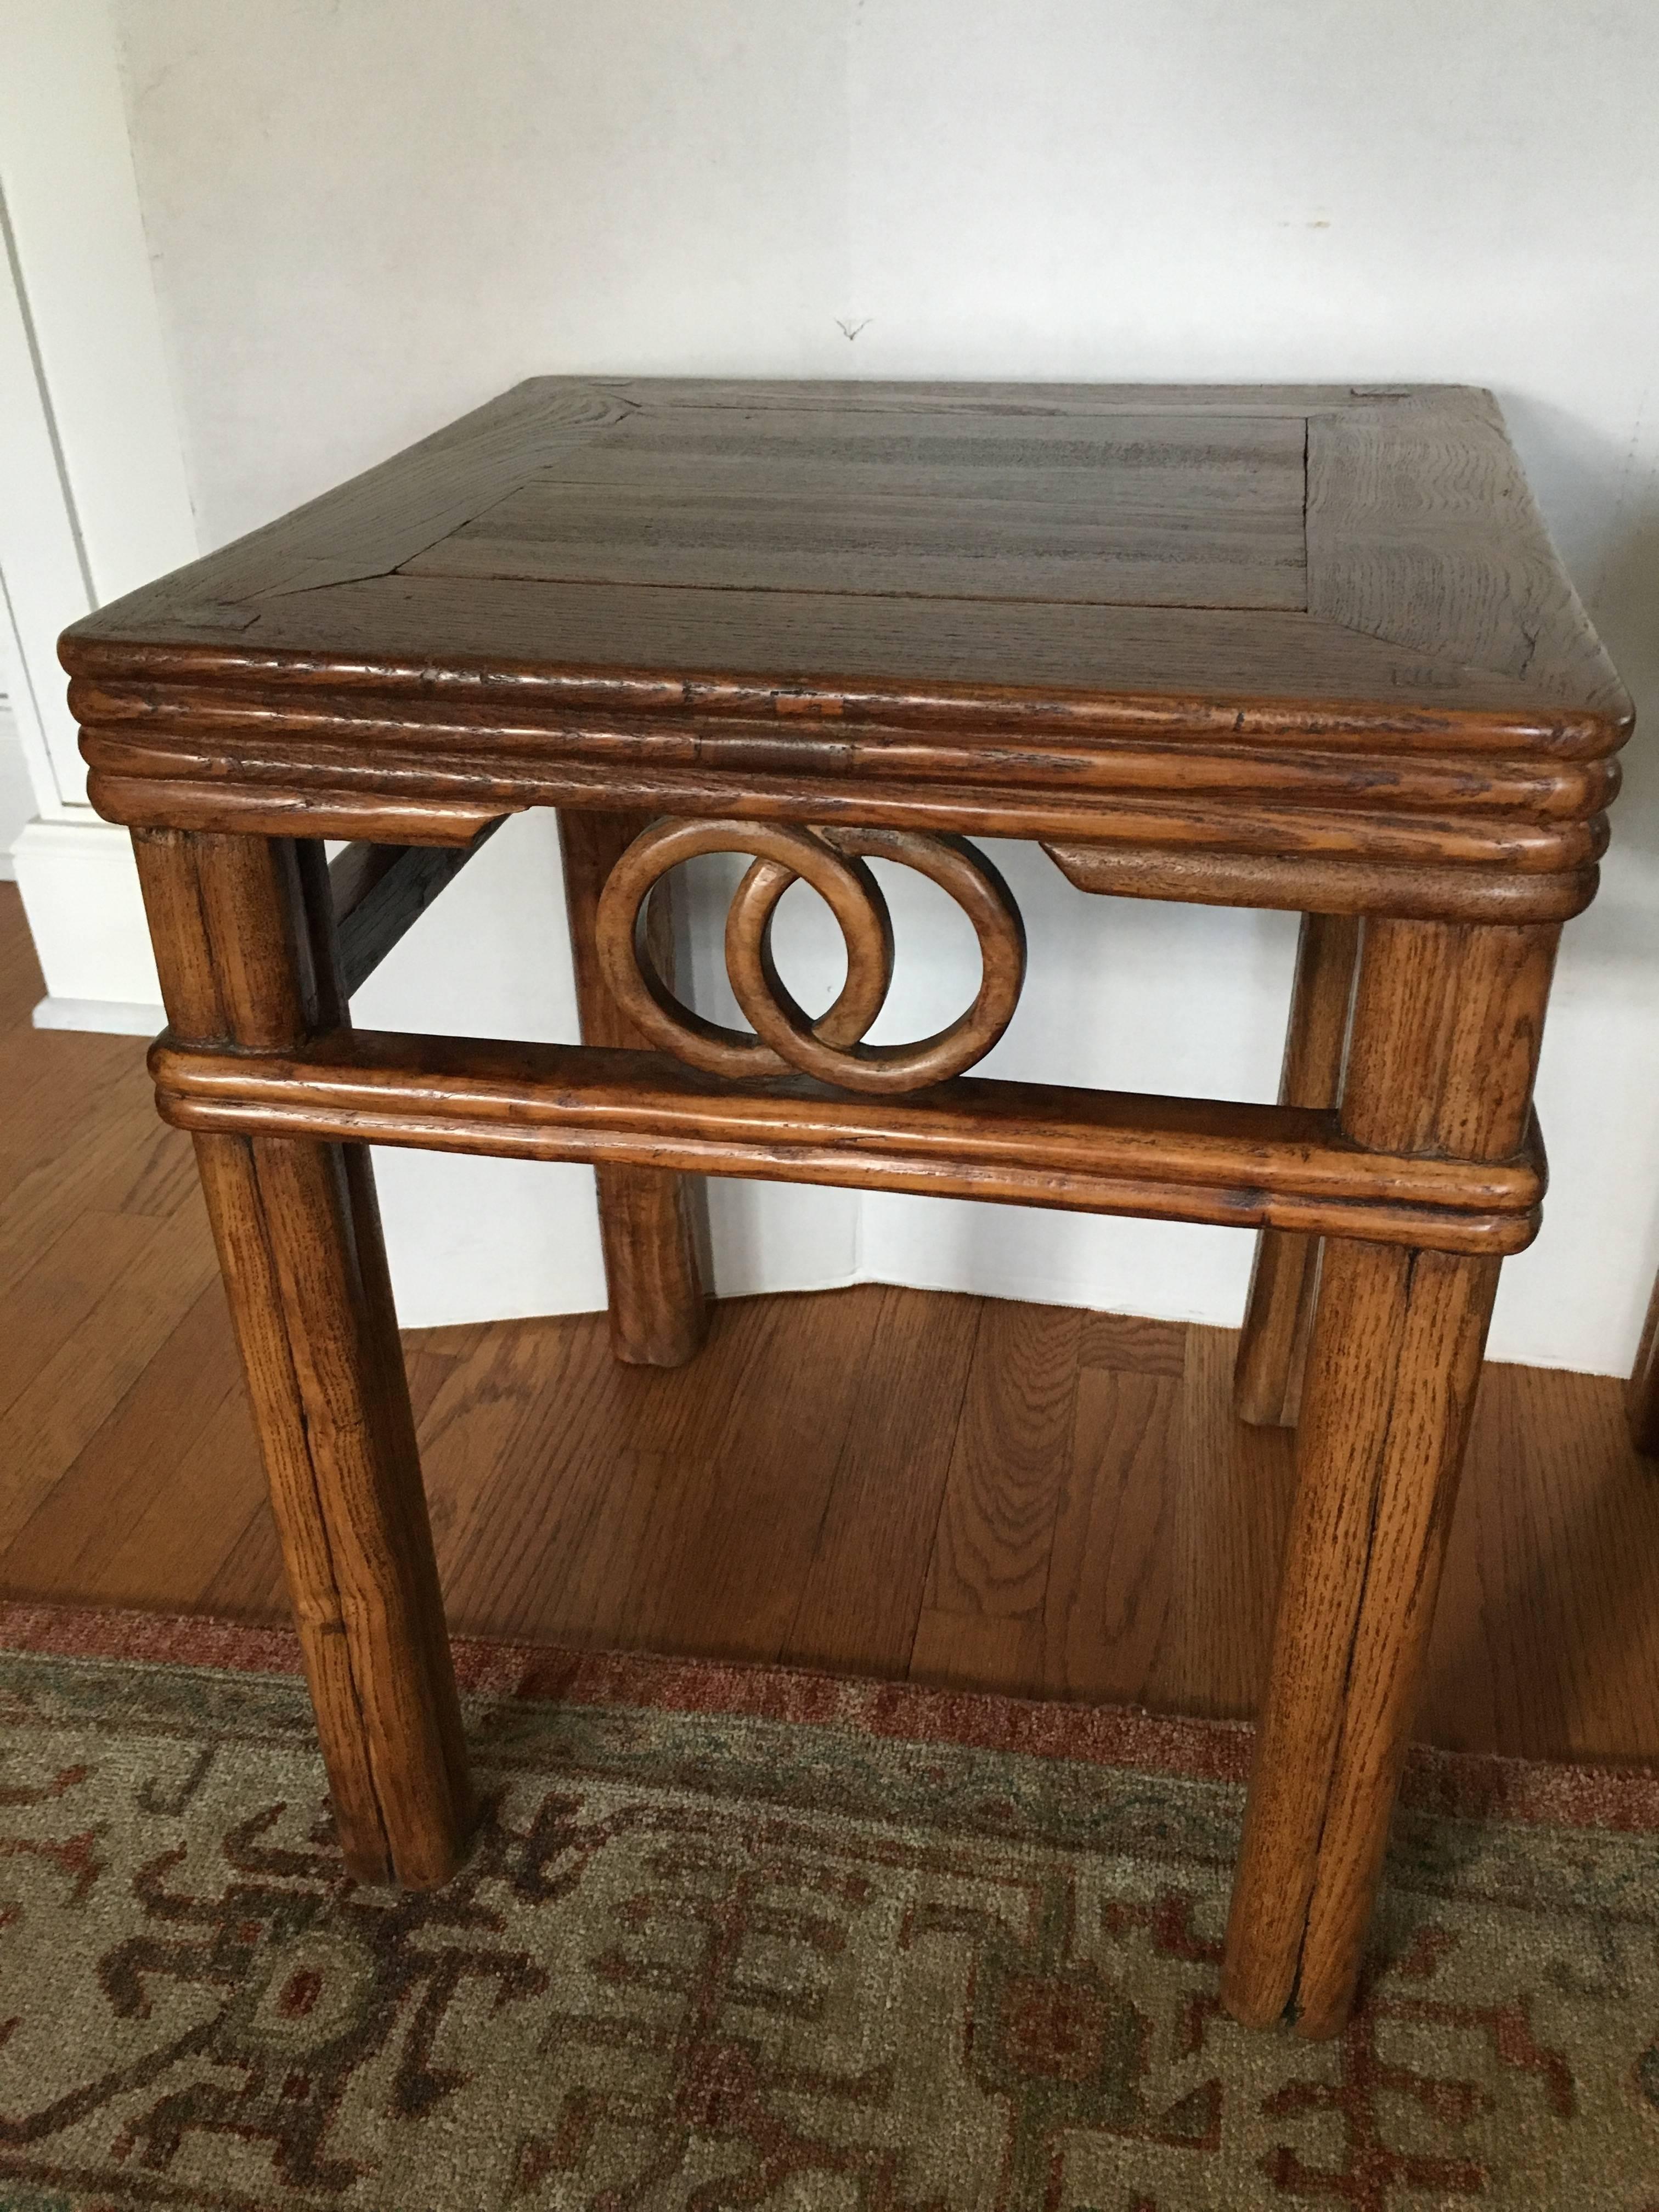 A pair of Chinese wood side tables with a wedding band motif.